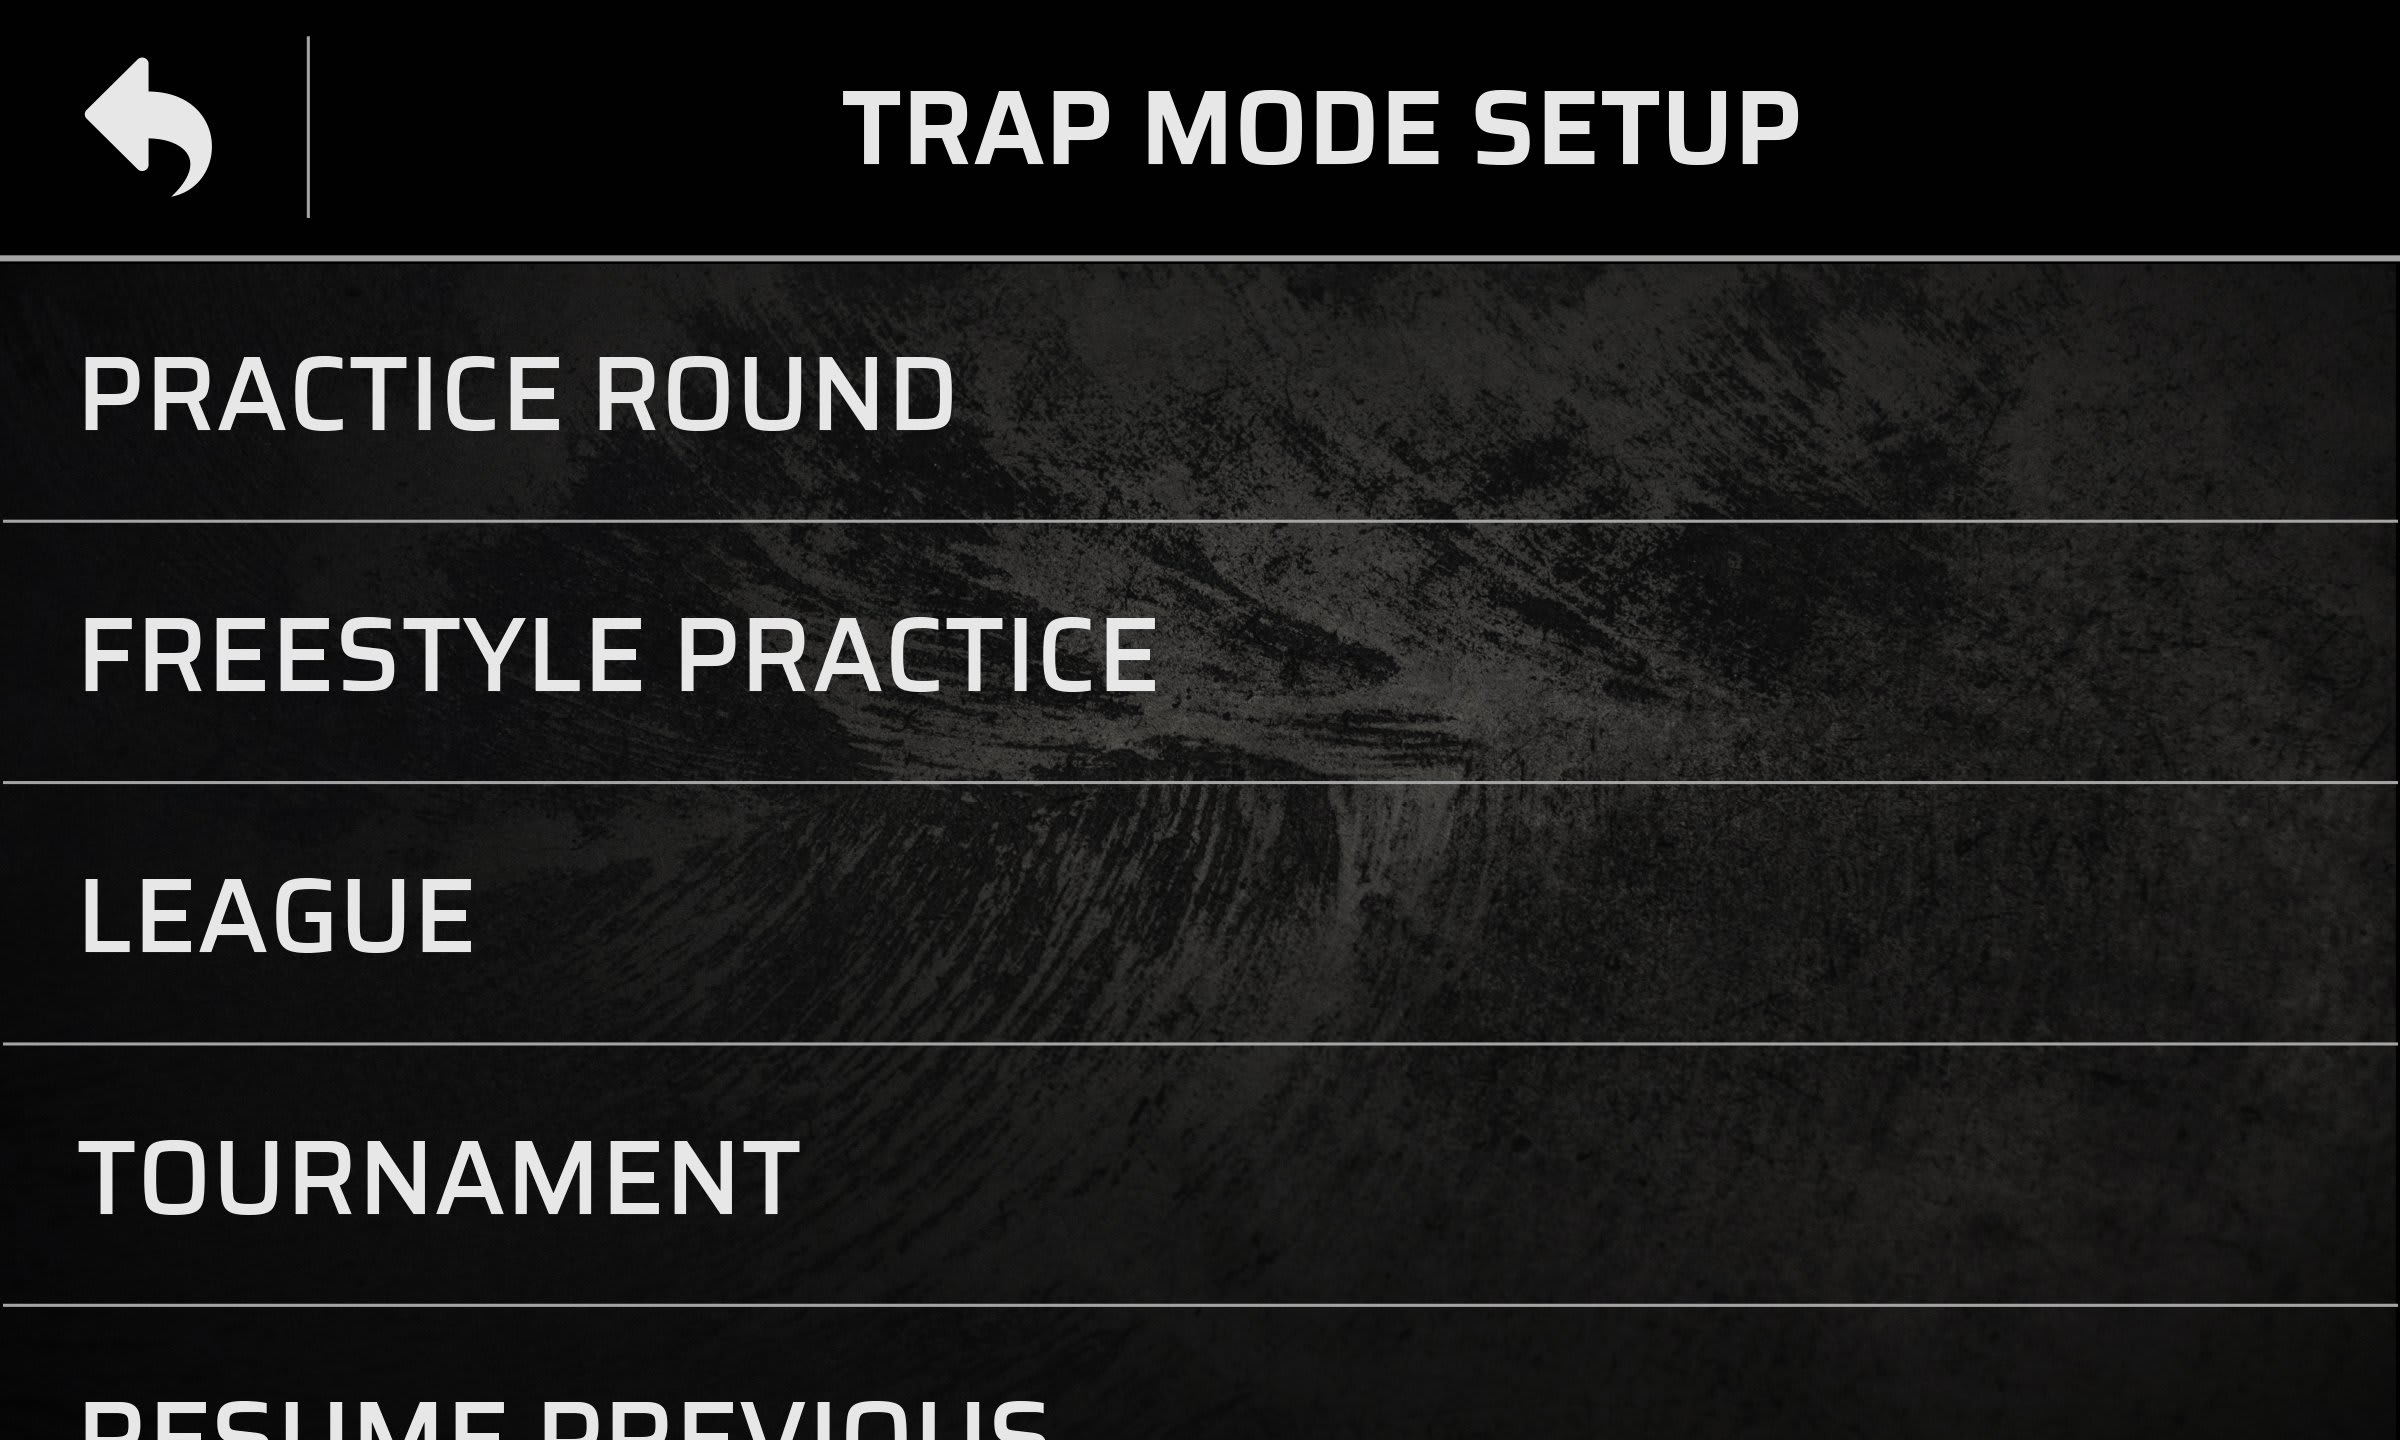 alistair sutton recommends How To Achieve Trap Mode